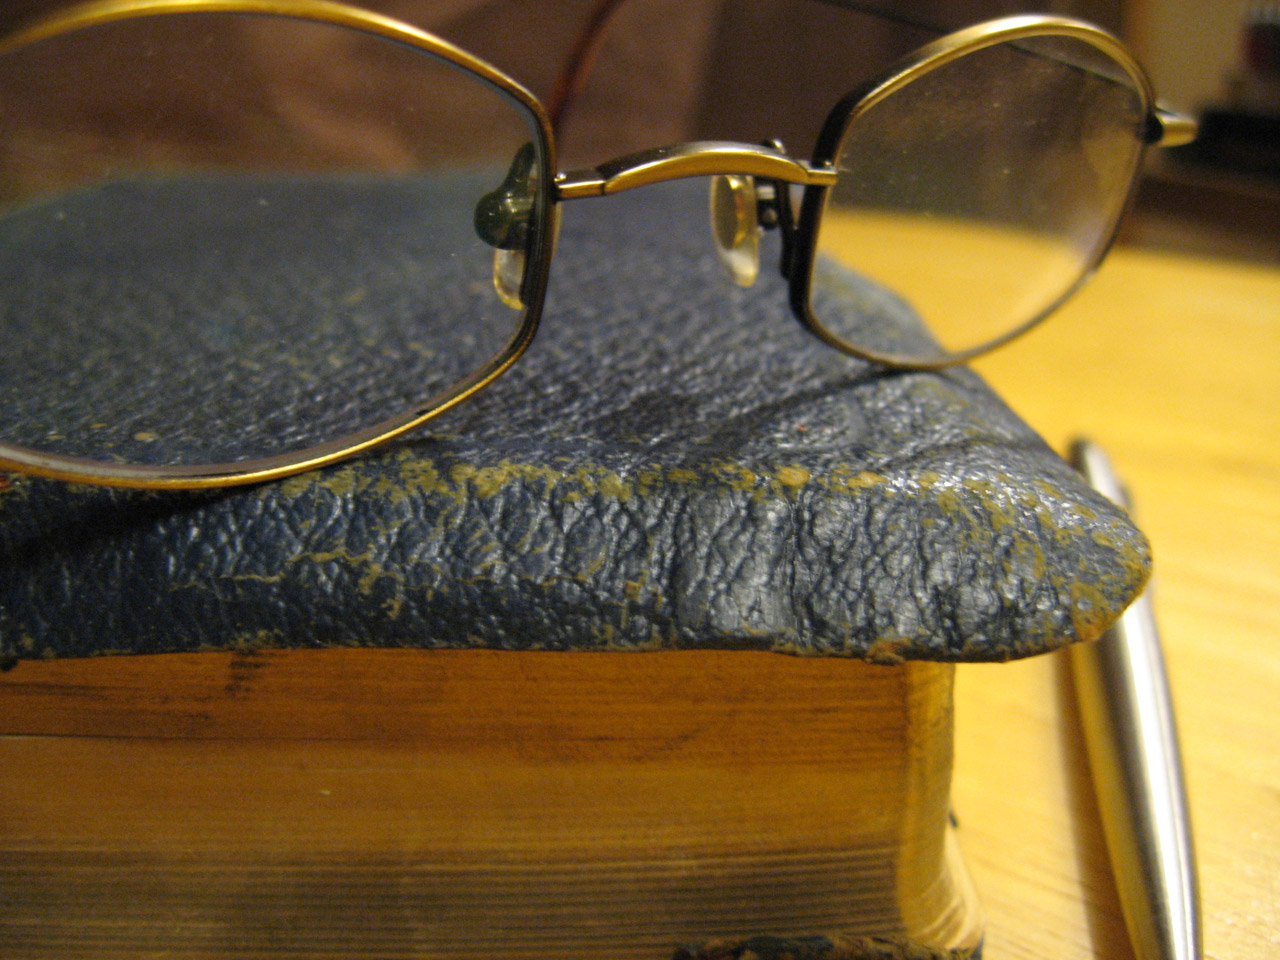 Glasses sitting on an old book.